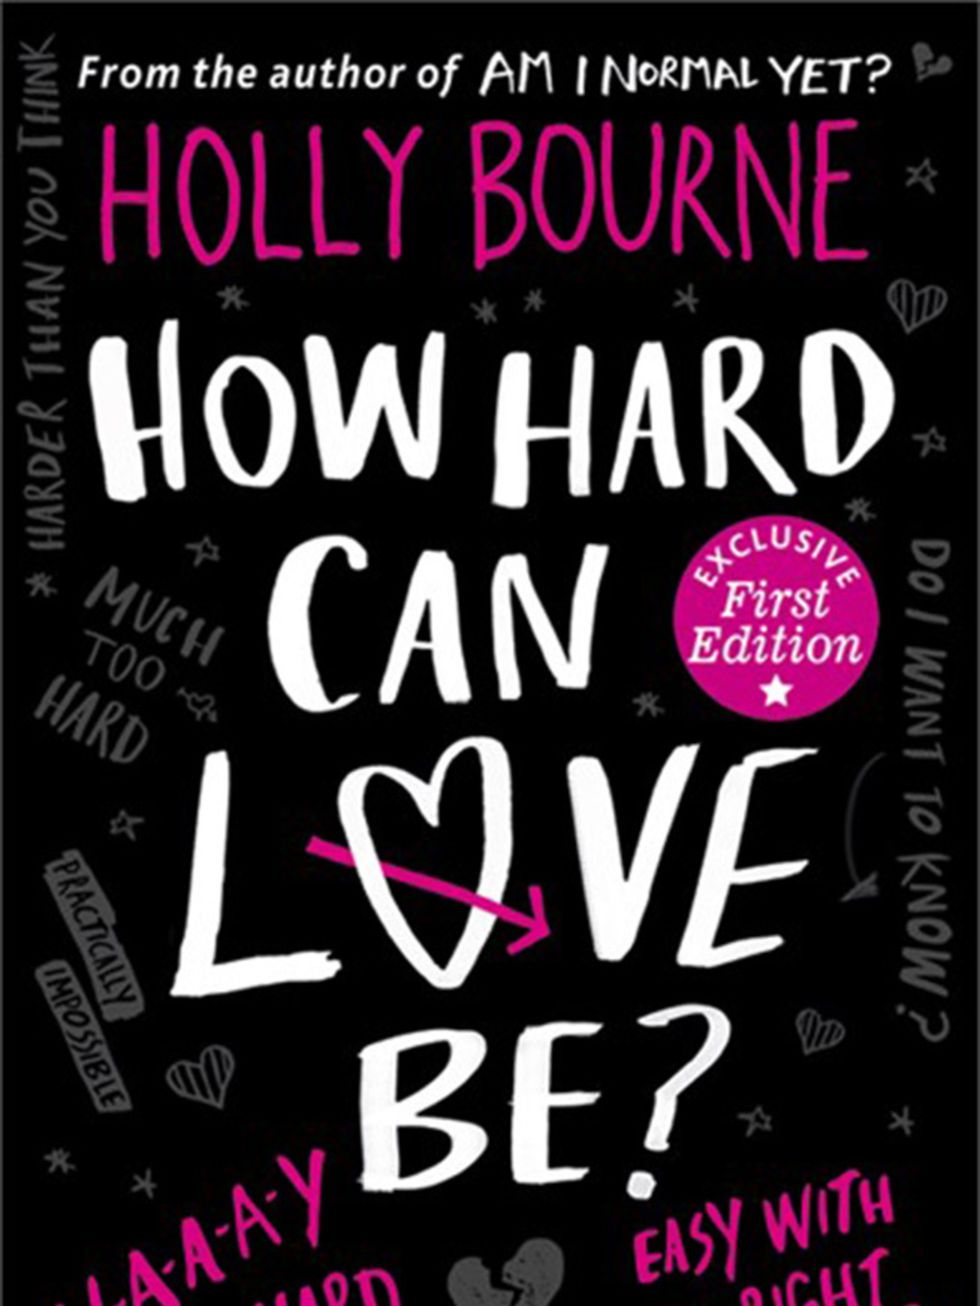 <p>Anna James, Literary Editor</p>

<p>I&rsquo;ve just started the second in Bourne&rsquo;s brilliant feminist YA series, the first one of which has just been shortlisted for the YA Book Prize. The series revolves around a trio of girls who form a feminis